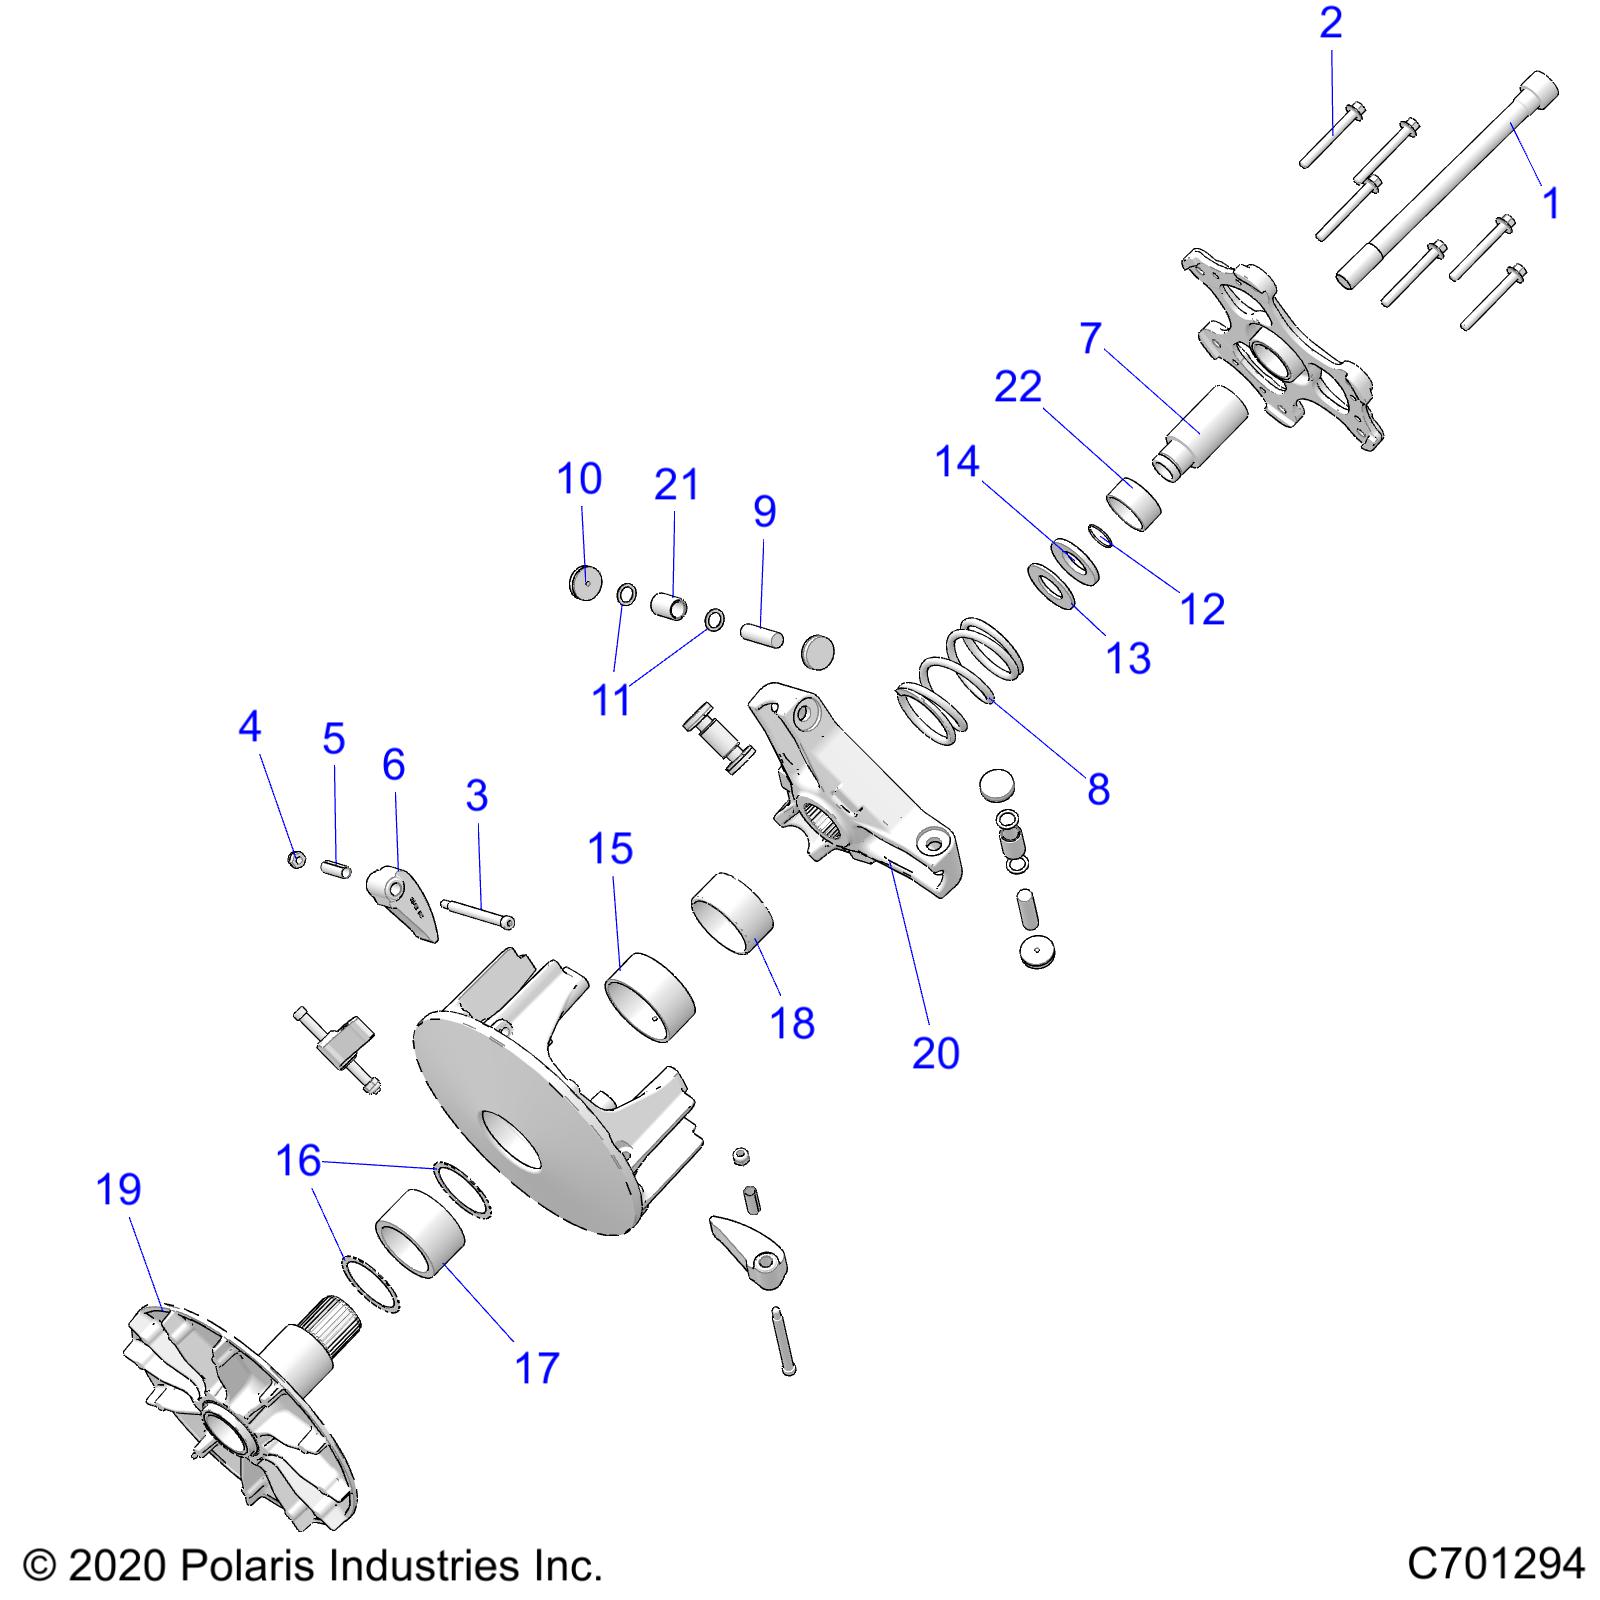 Part Number : 1323704 ASM-WEIGHT-SHIFT 32-112 HC (3)